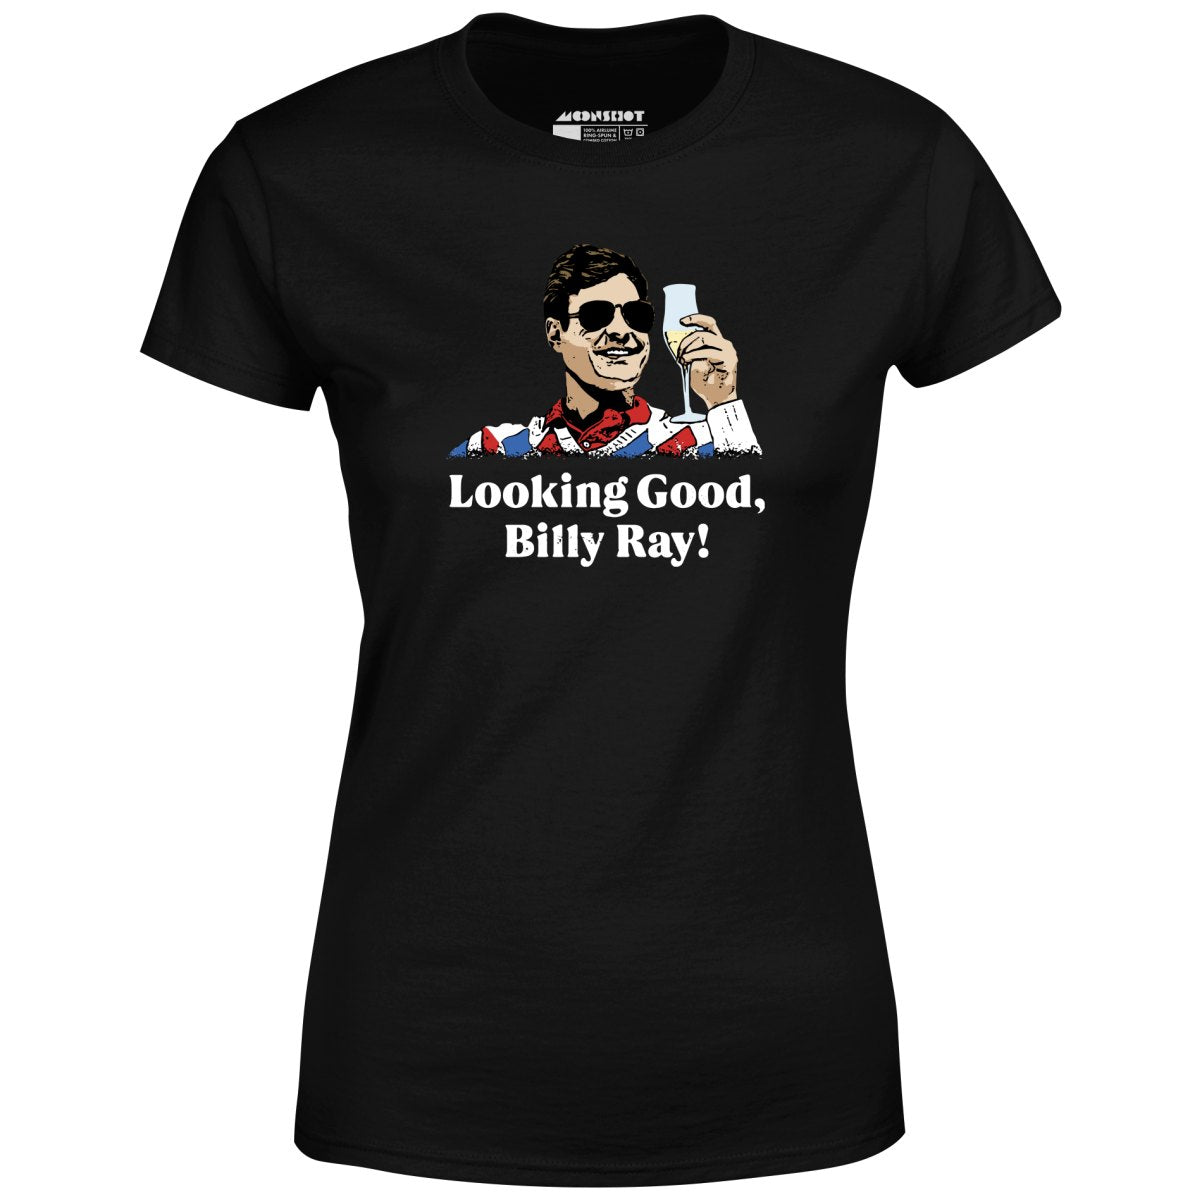 Looking Good, Billy Ray! - Women's T-Shirt